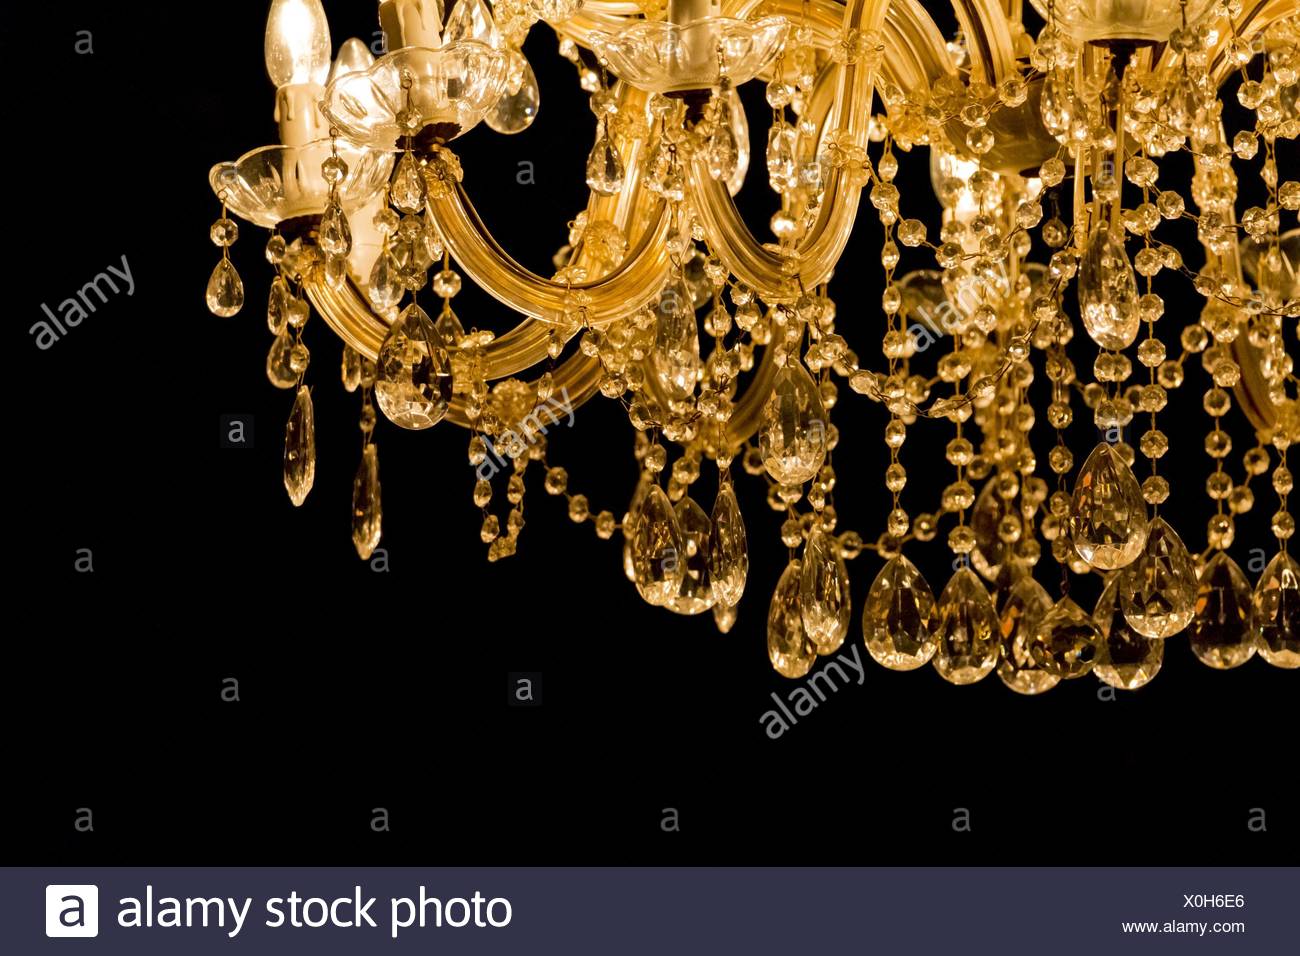 Luxury Chandelier With Light Candles And Right Dark Background